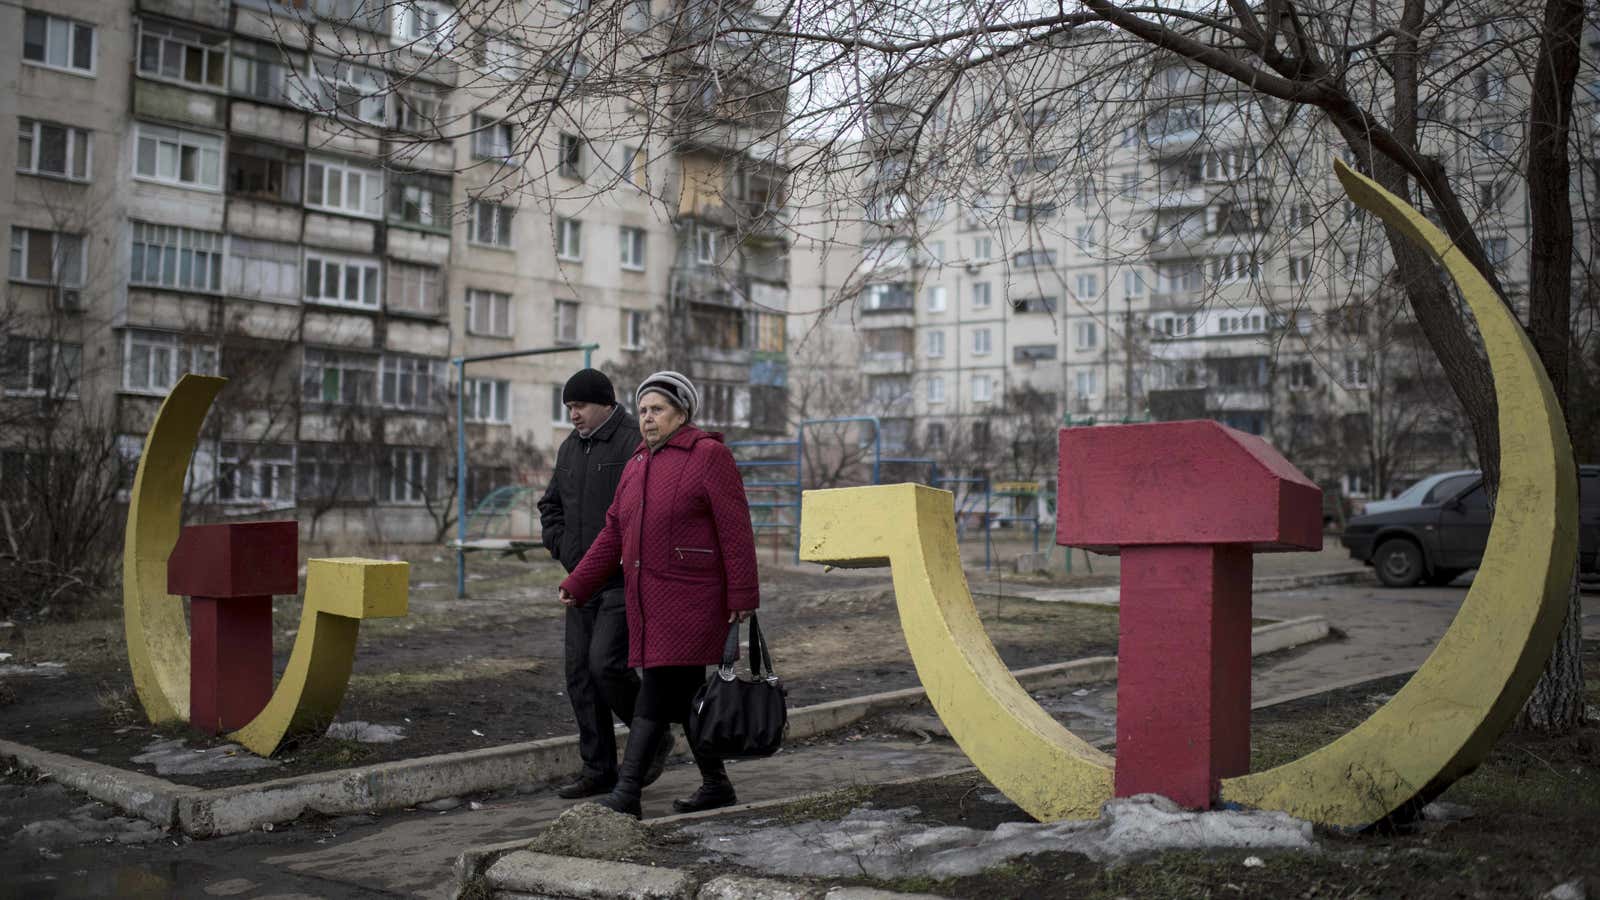 Pivoting away from Russia means Europe must reckon with Ukraine’s systemic human rights issues.